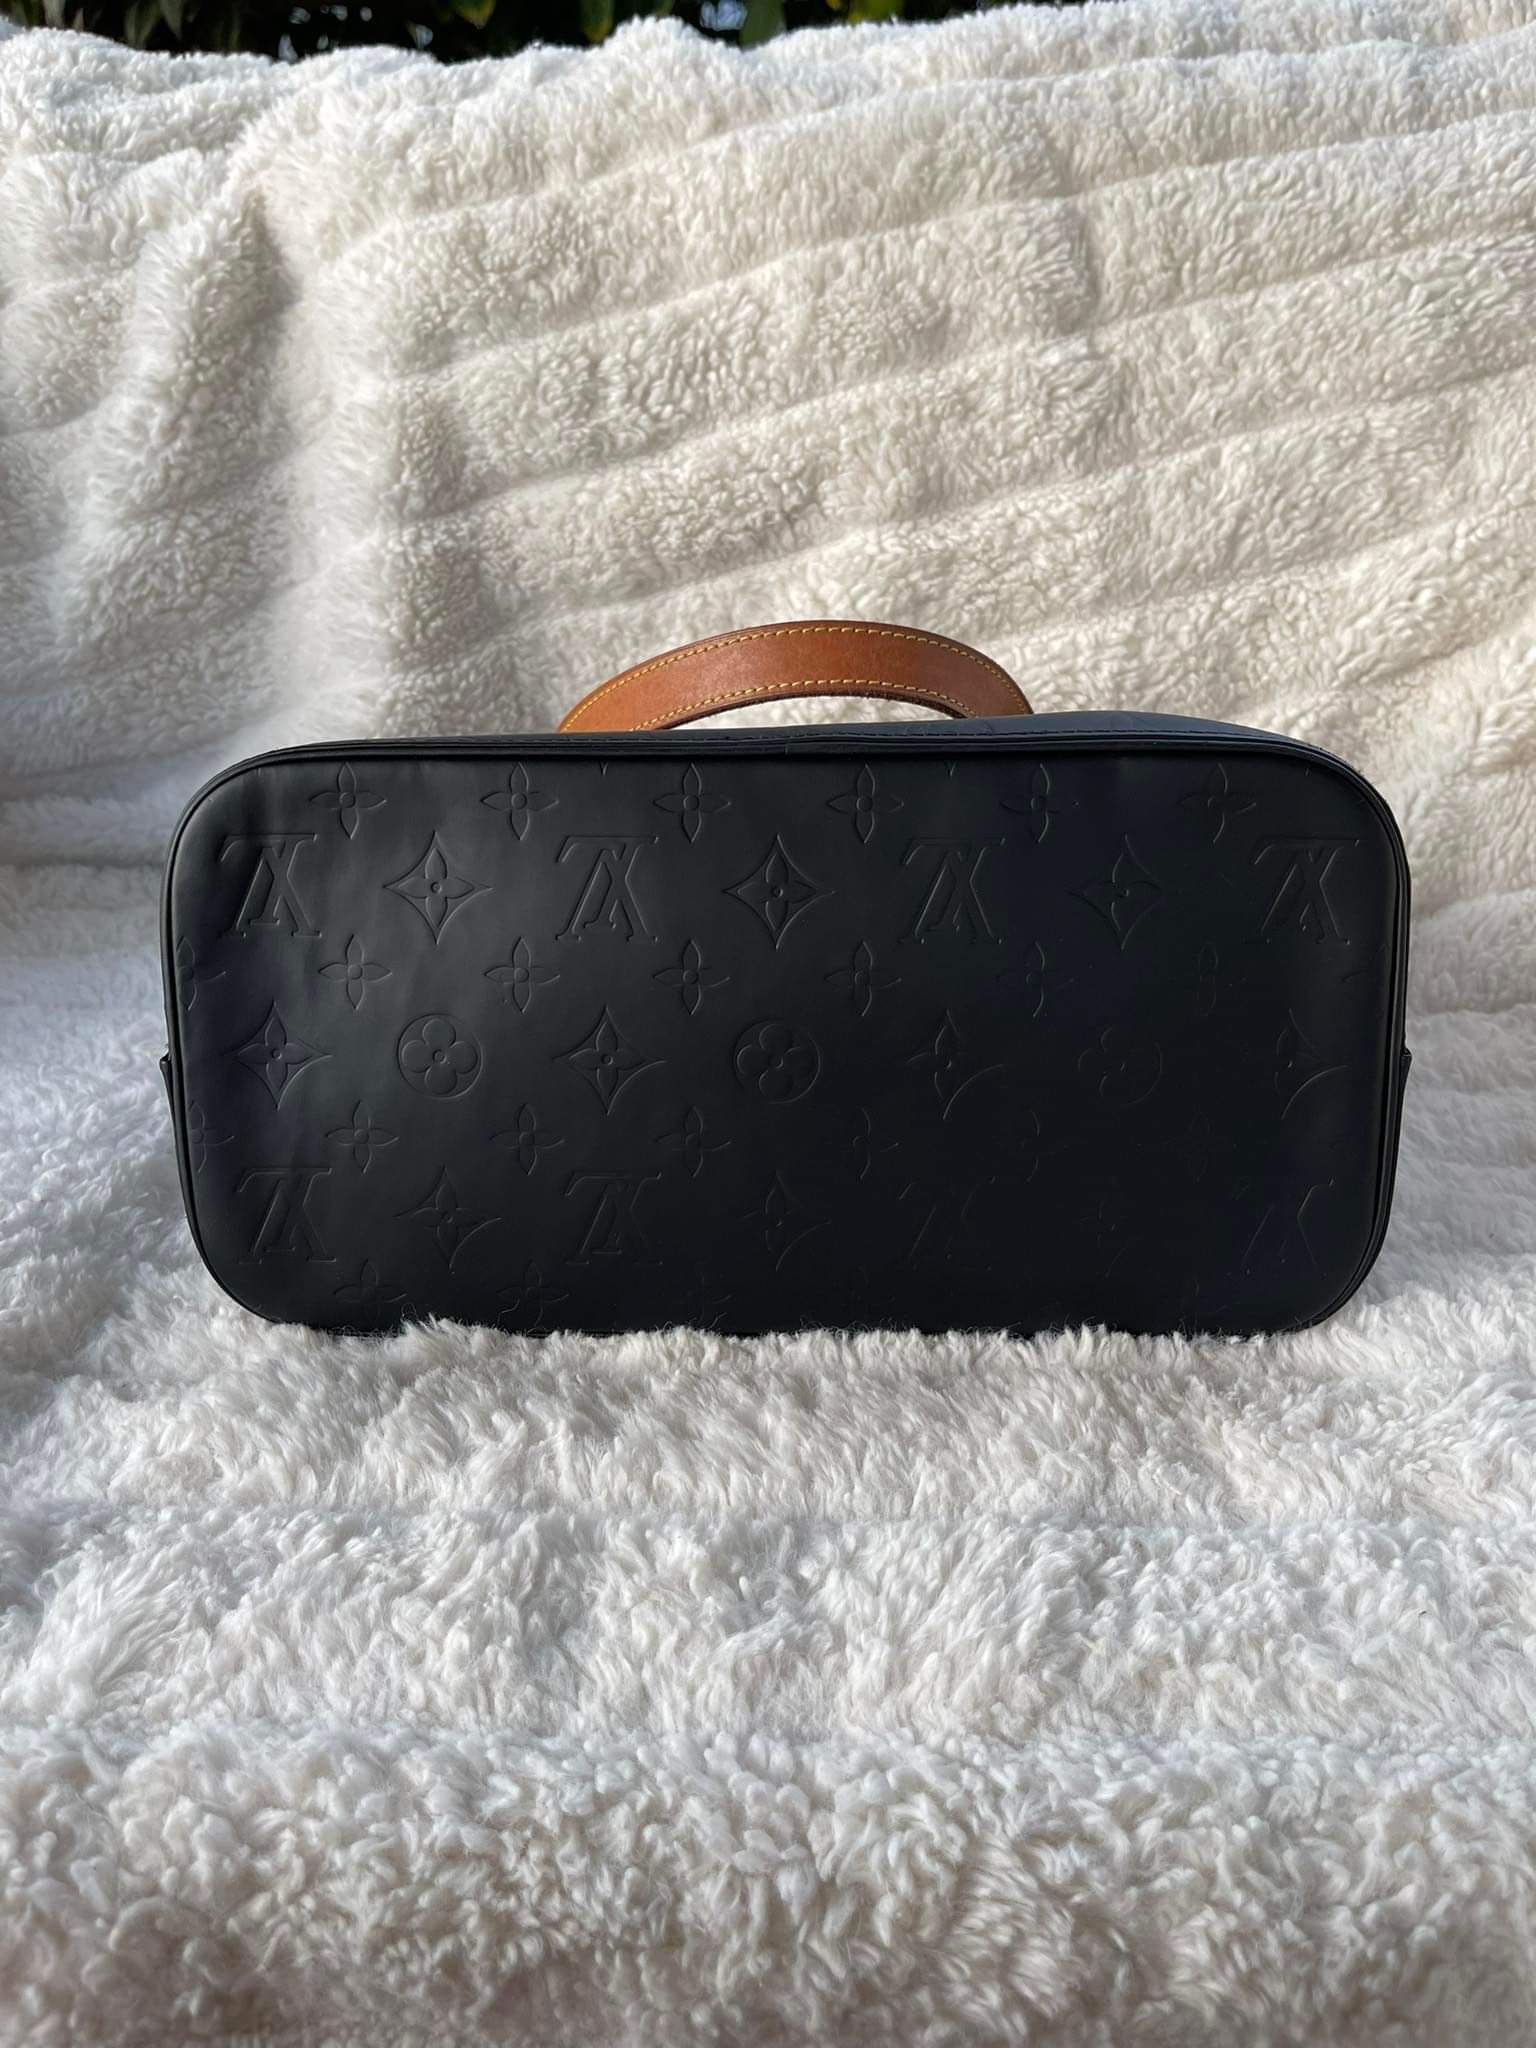 Louis Vuitton Victoire Bags for Sale in West New York, NJ - OfferUp